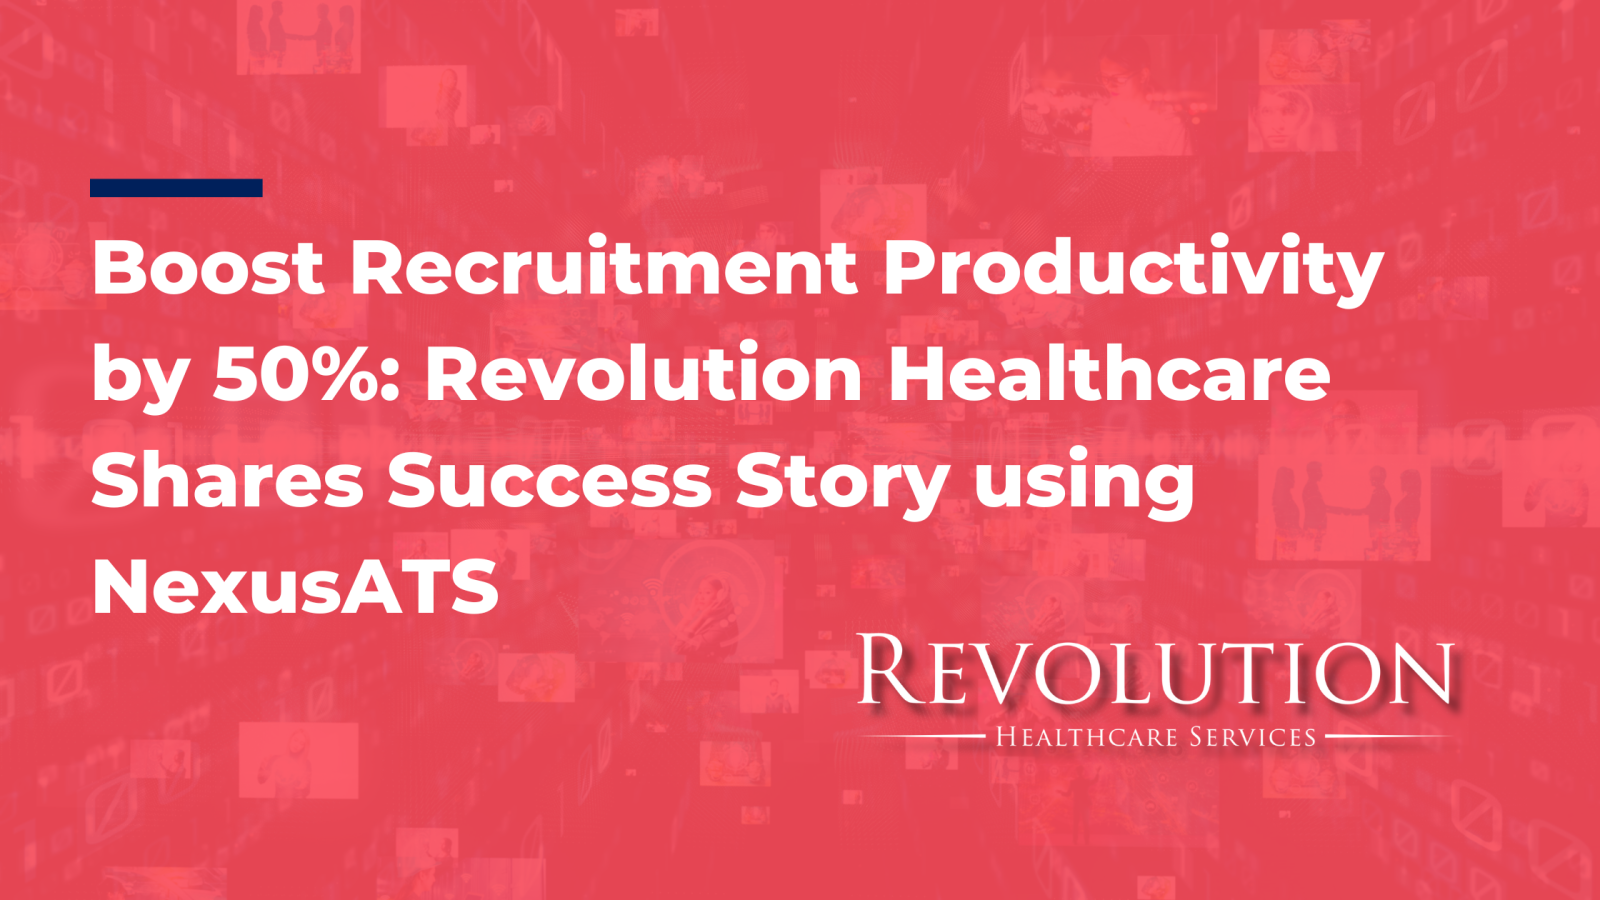 Boost Recruitment Productivity by 50%: Revolution Healthcare